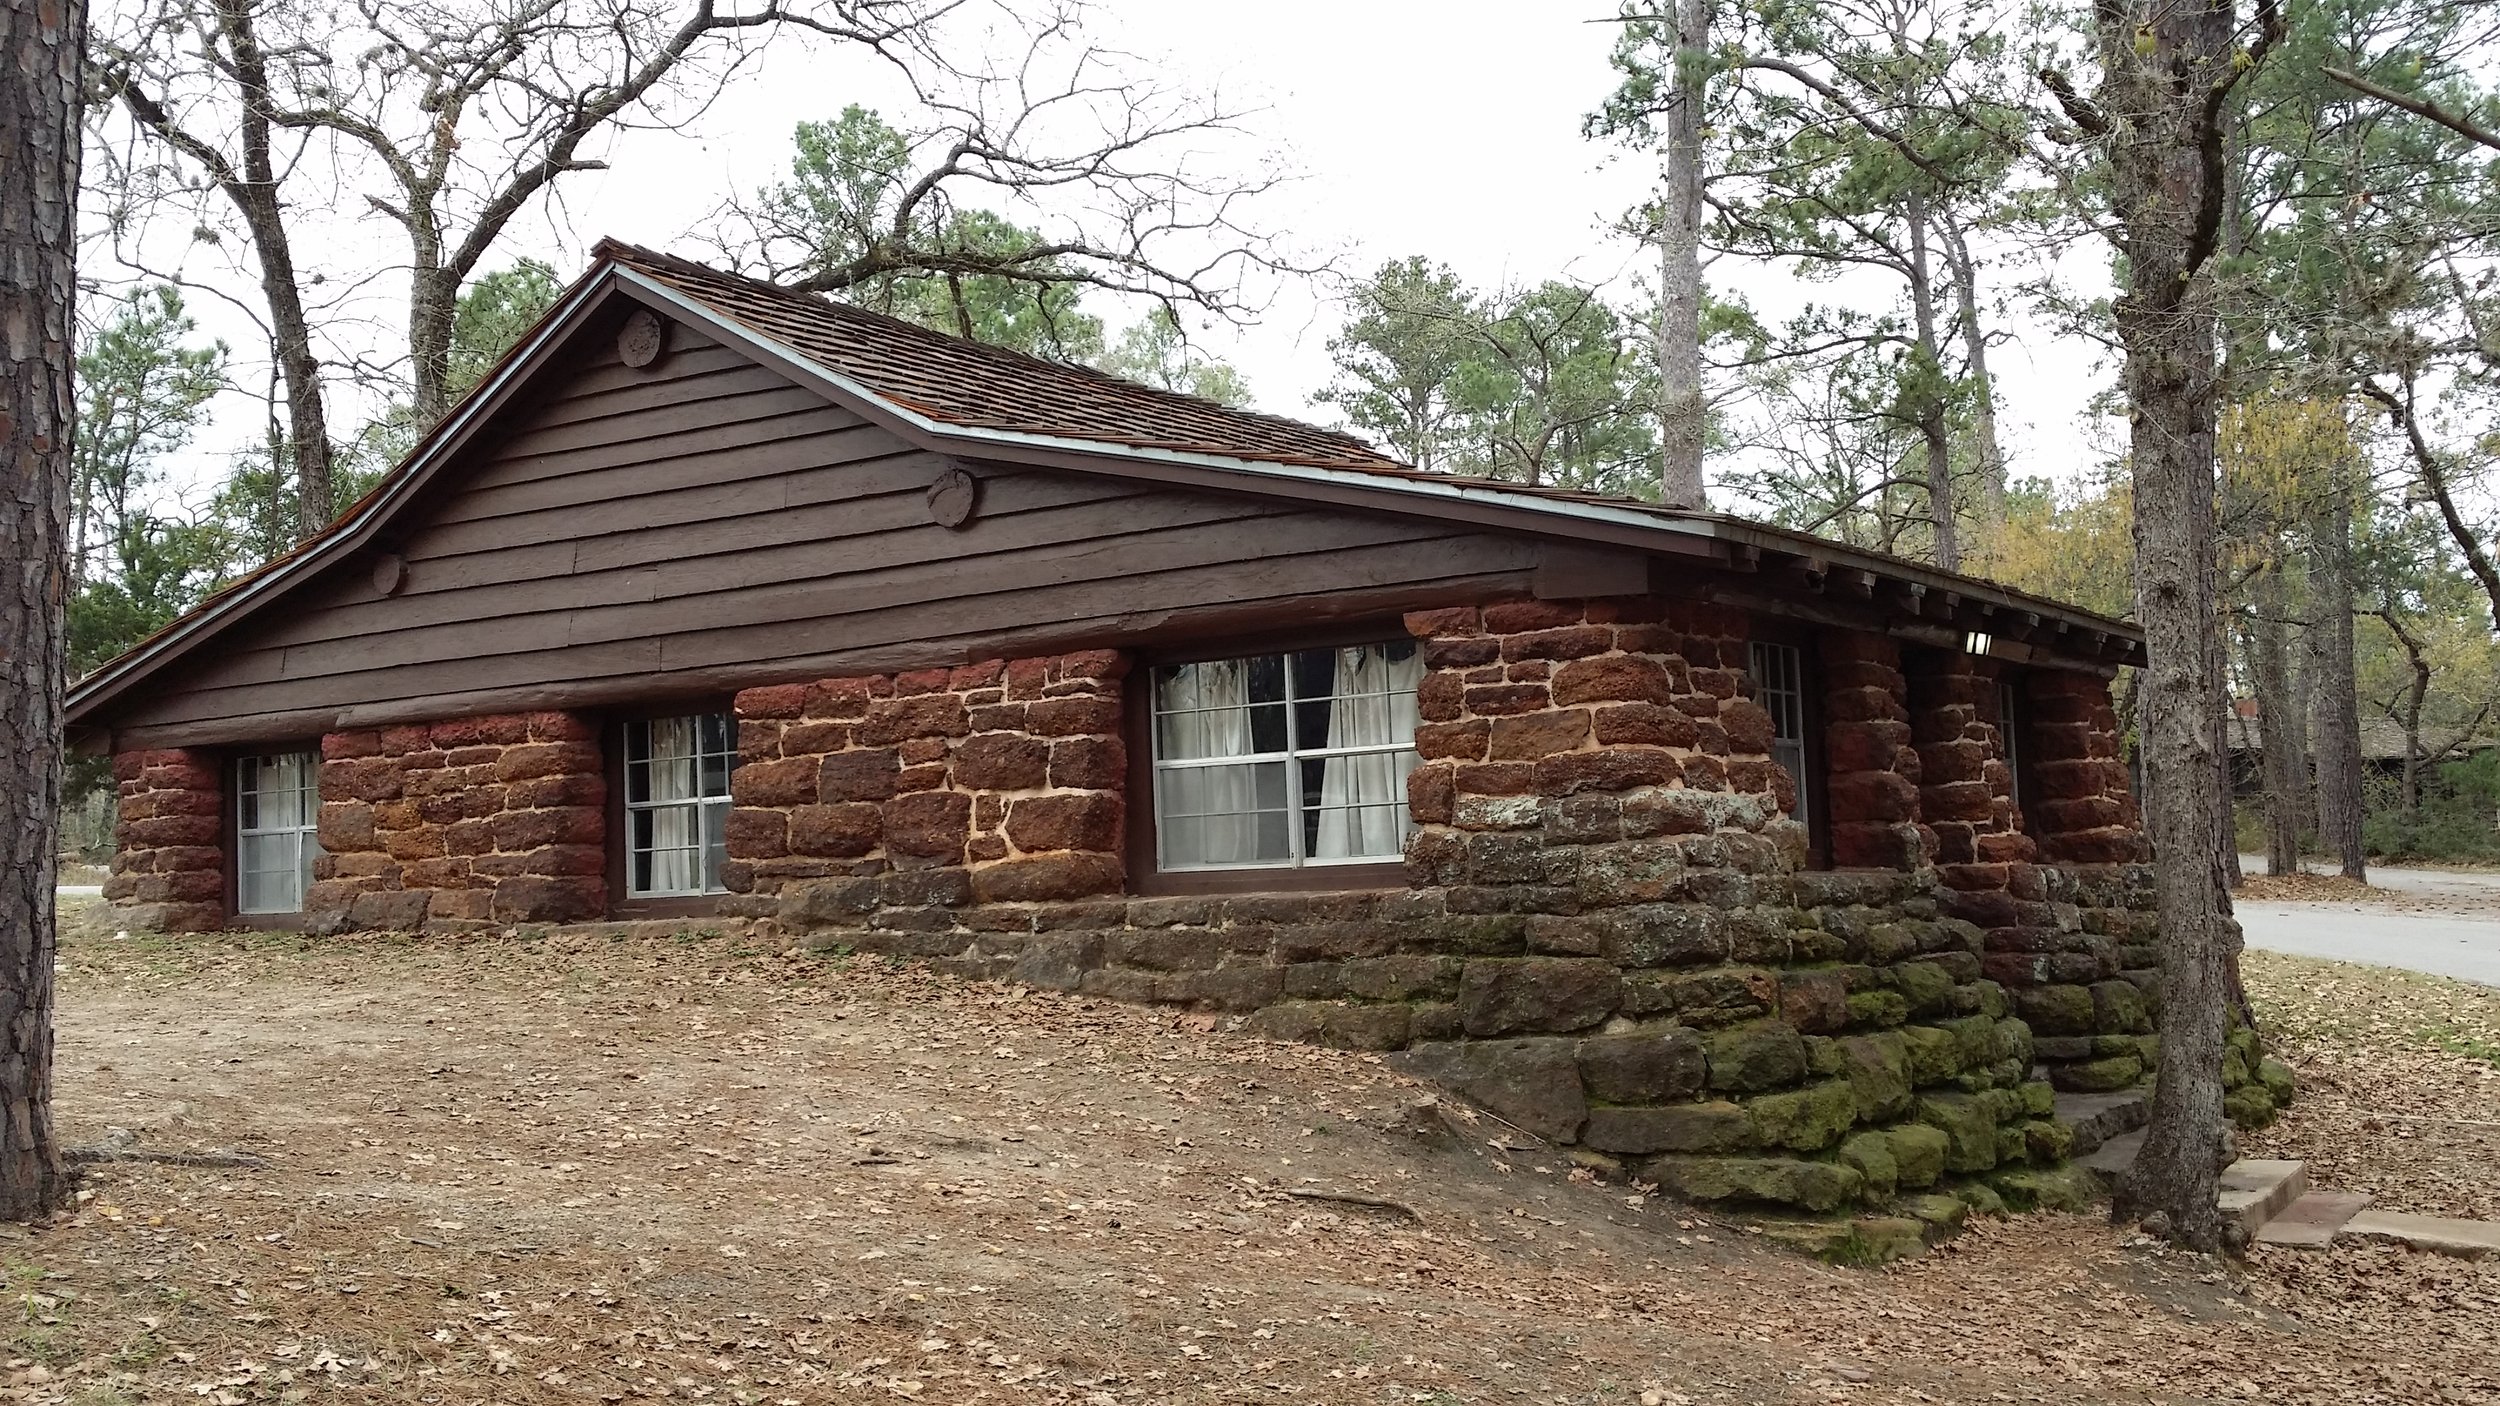 Cabins from another era-Bastrop State Park-Bastrop Cabins.jpg